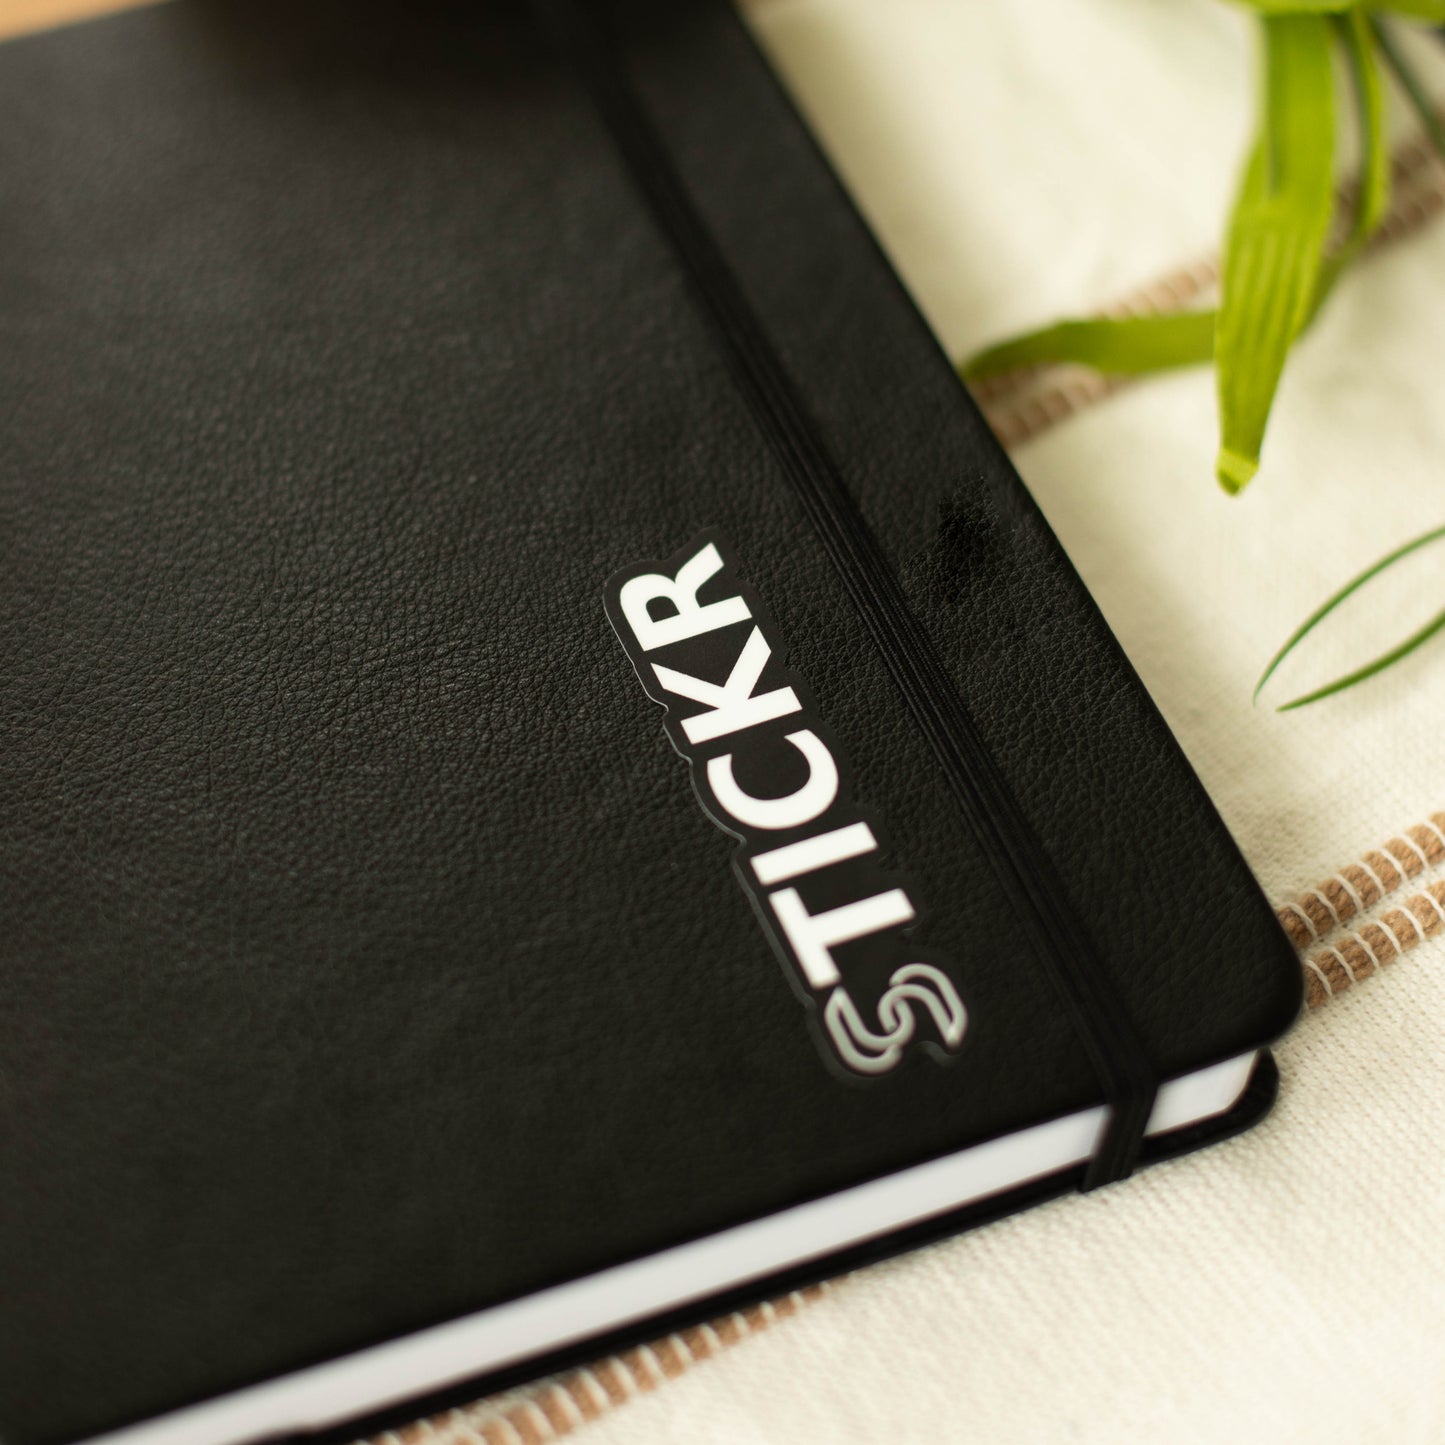 A black and white vinyl sticker of the Stickr logo on a notebook